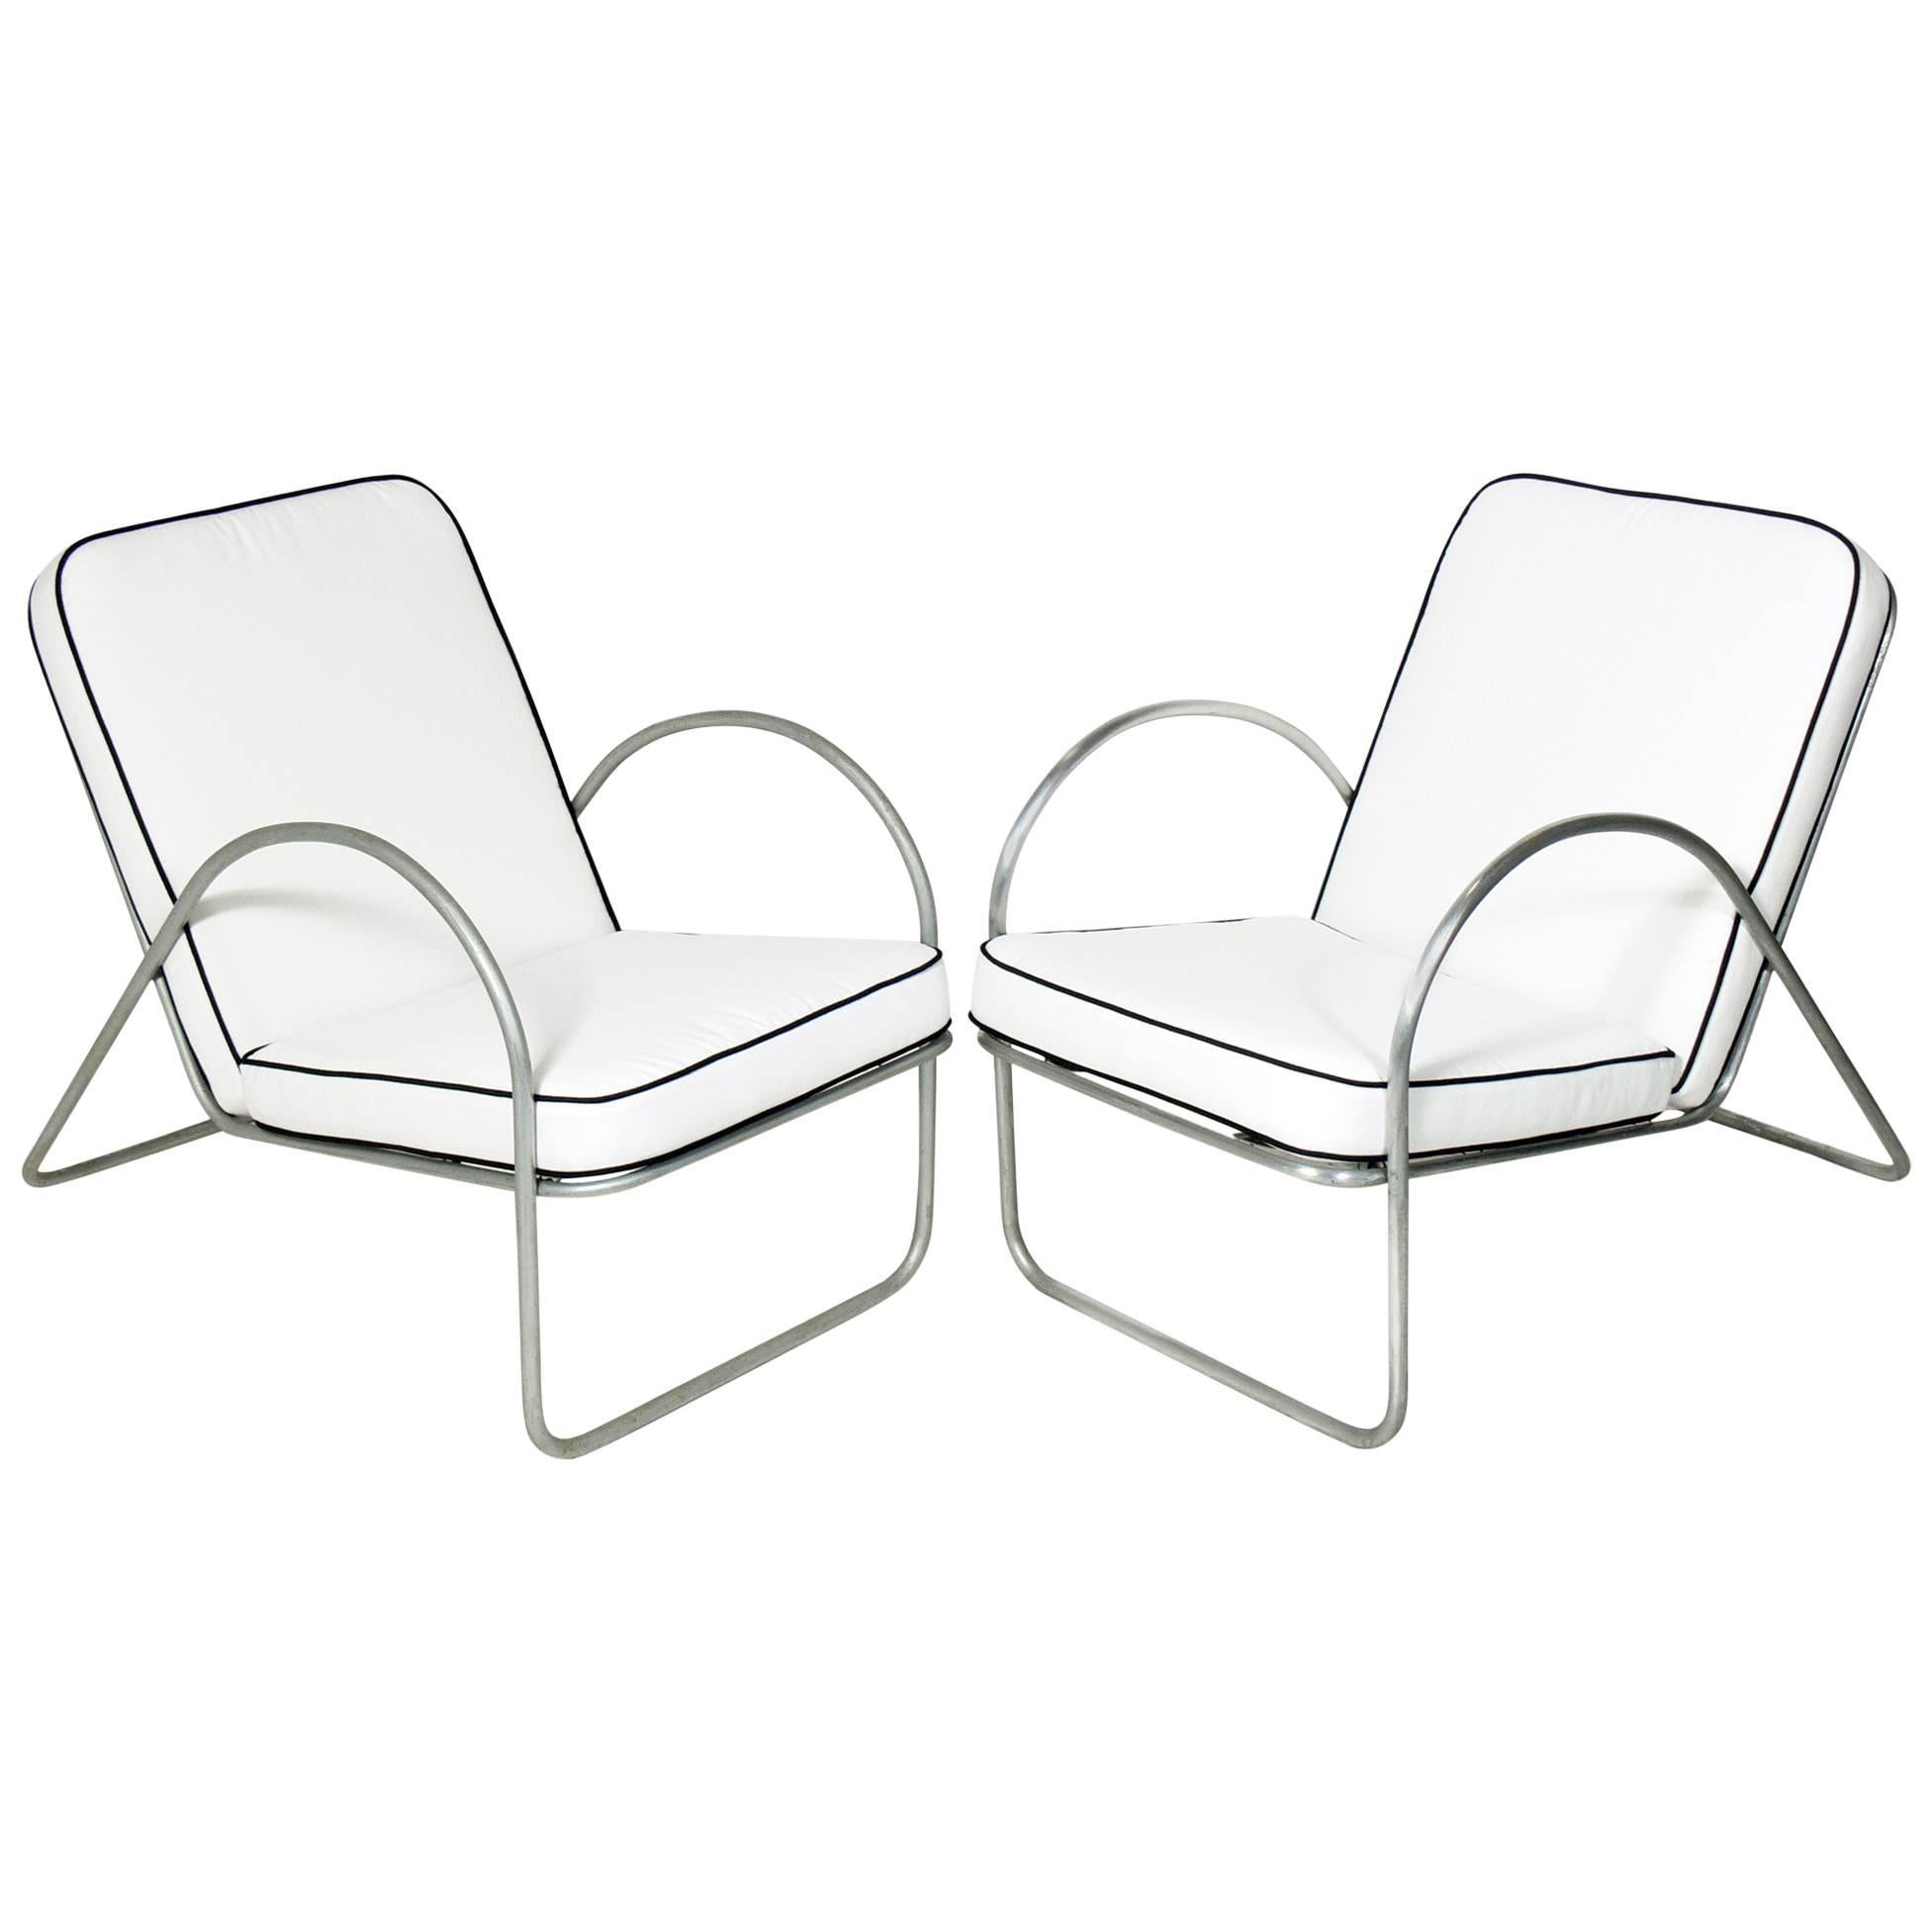 Pair of Streamlined Aluminum Chairs Attributed to Richard Neutra